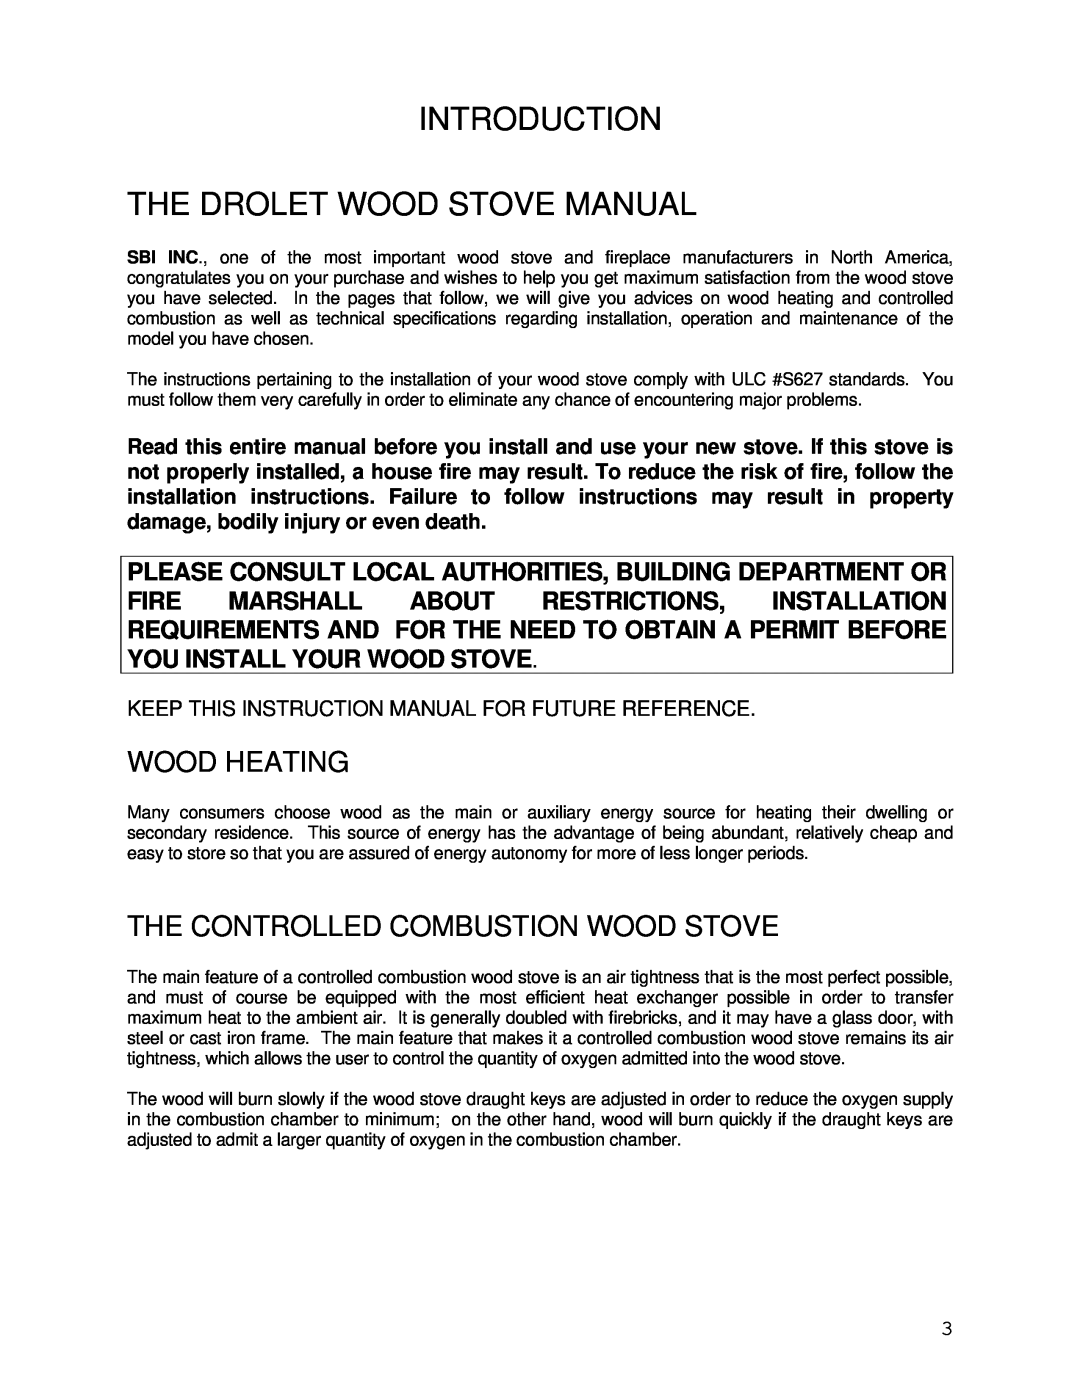 Drolet CS1200 manual Introduction The Drolet Wood Stove Manual, Wood Heating, The Controlled Combustion Wood Stove 